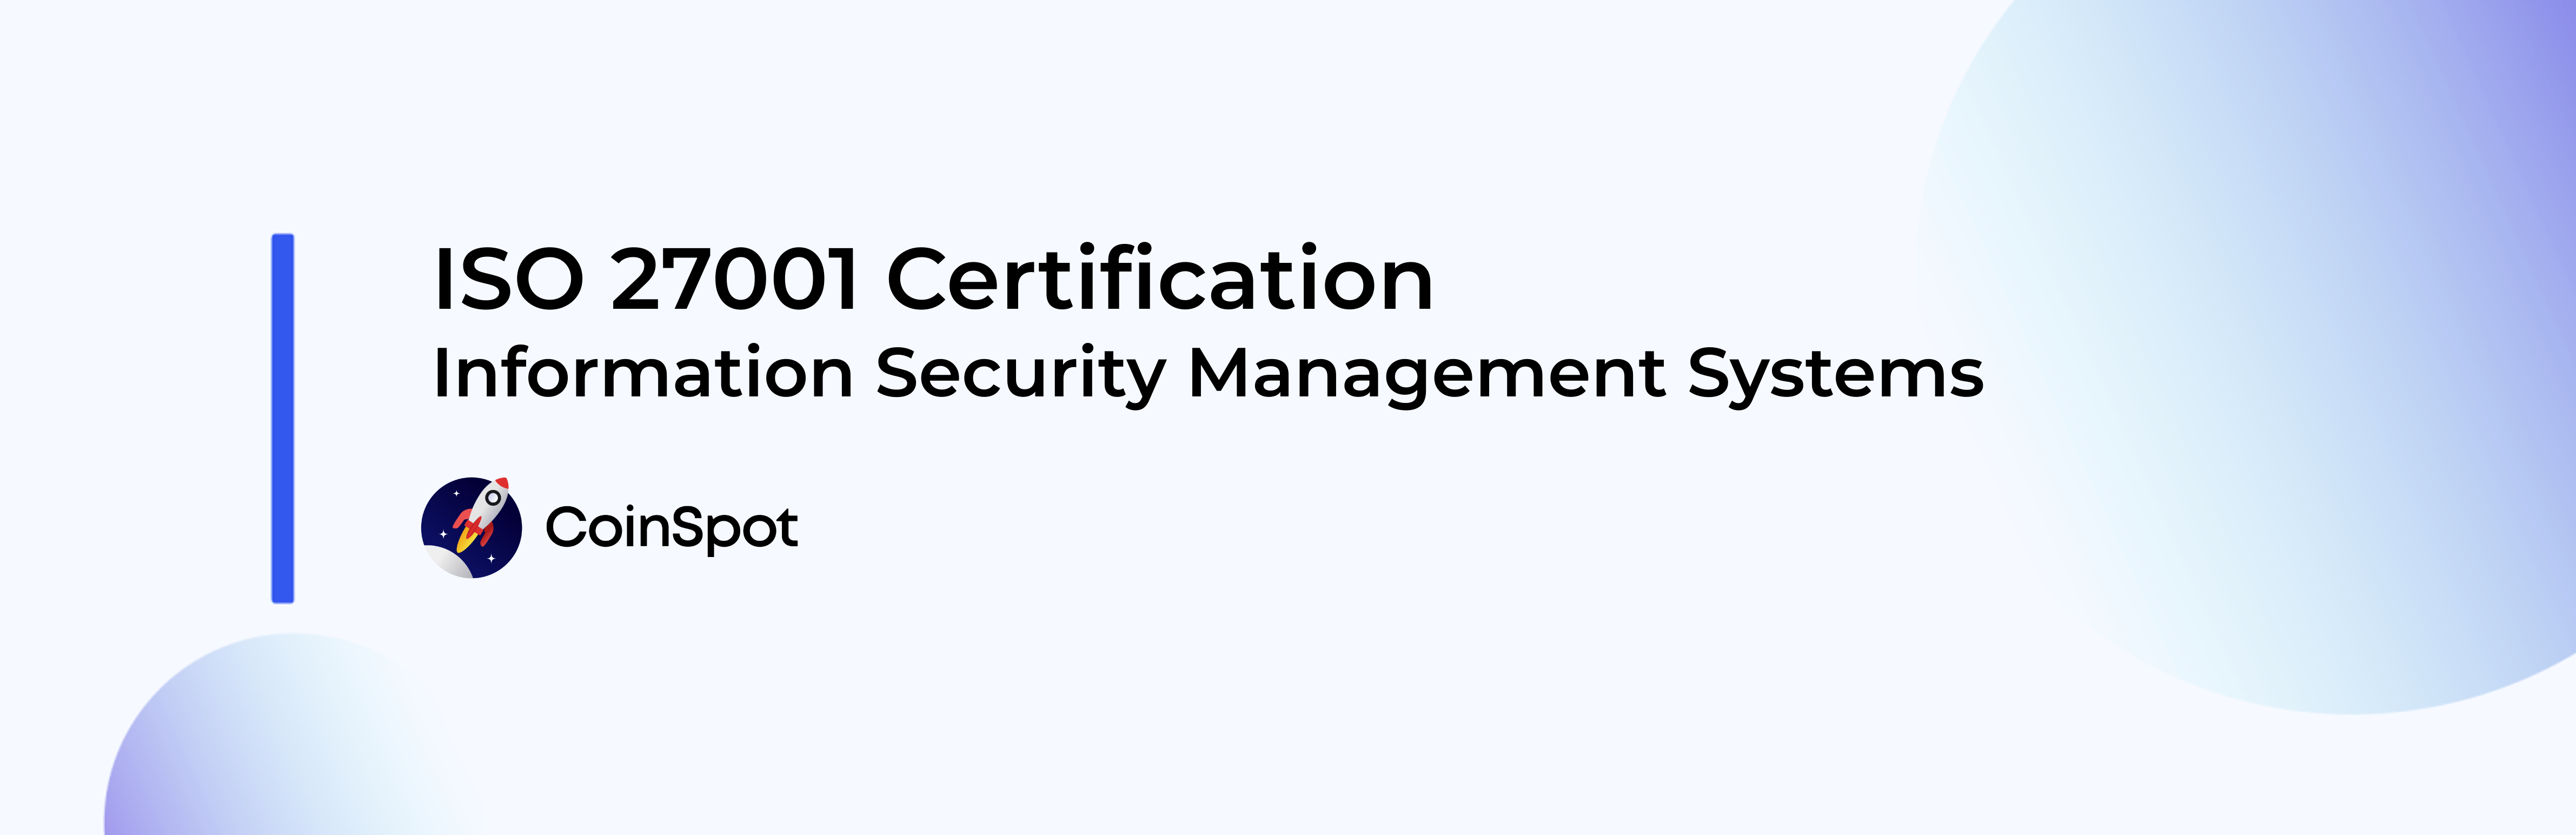 CoinSpot - ISO 27001 Certification.png